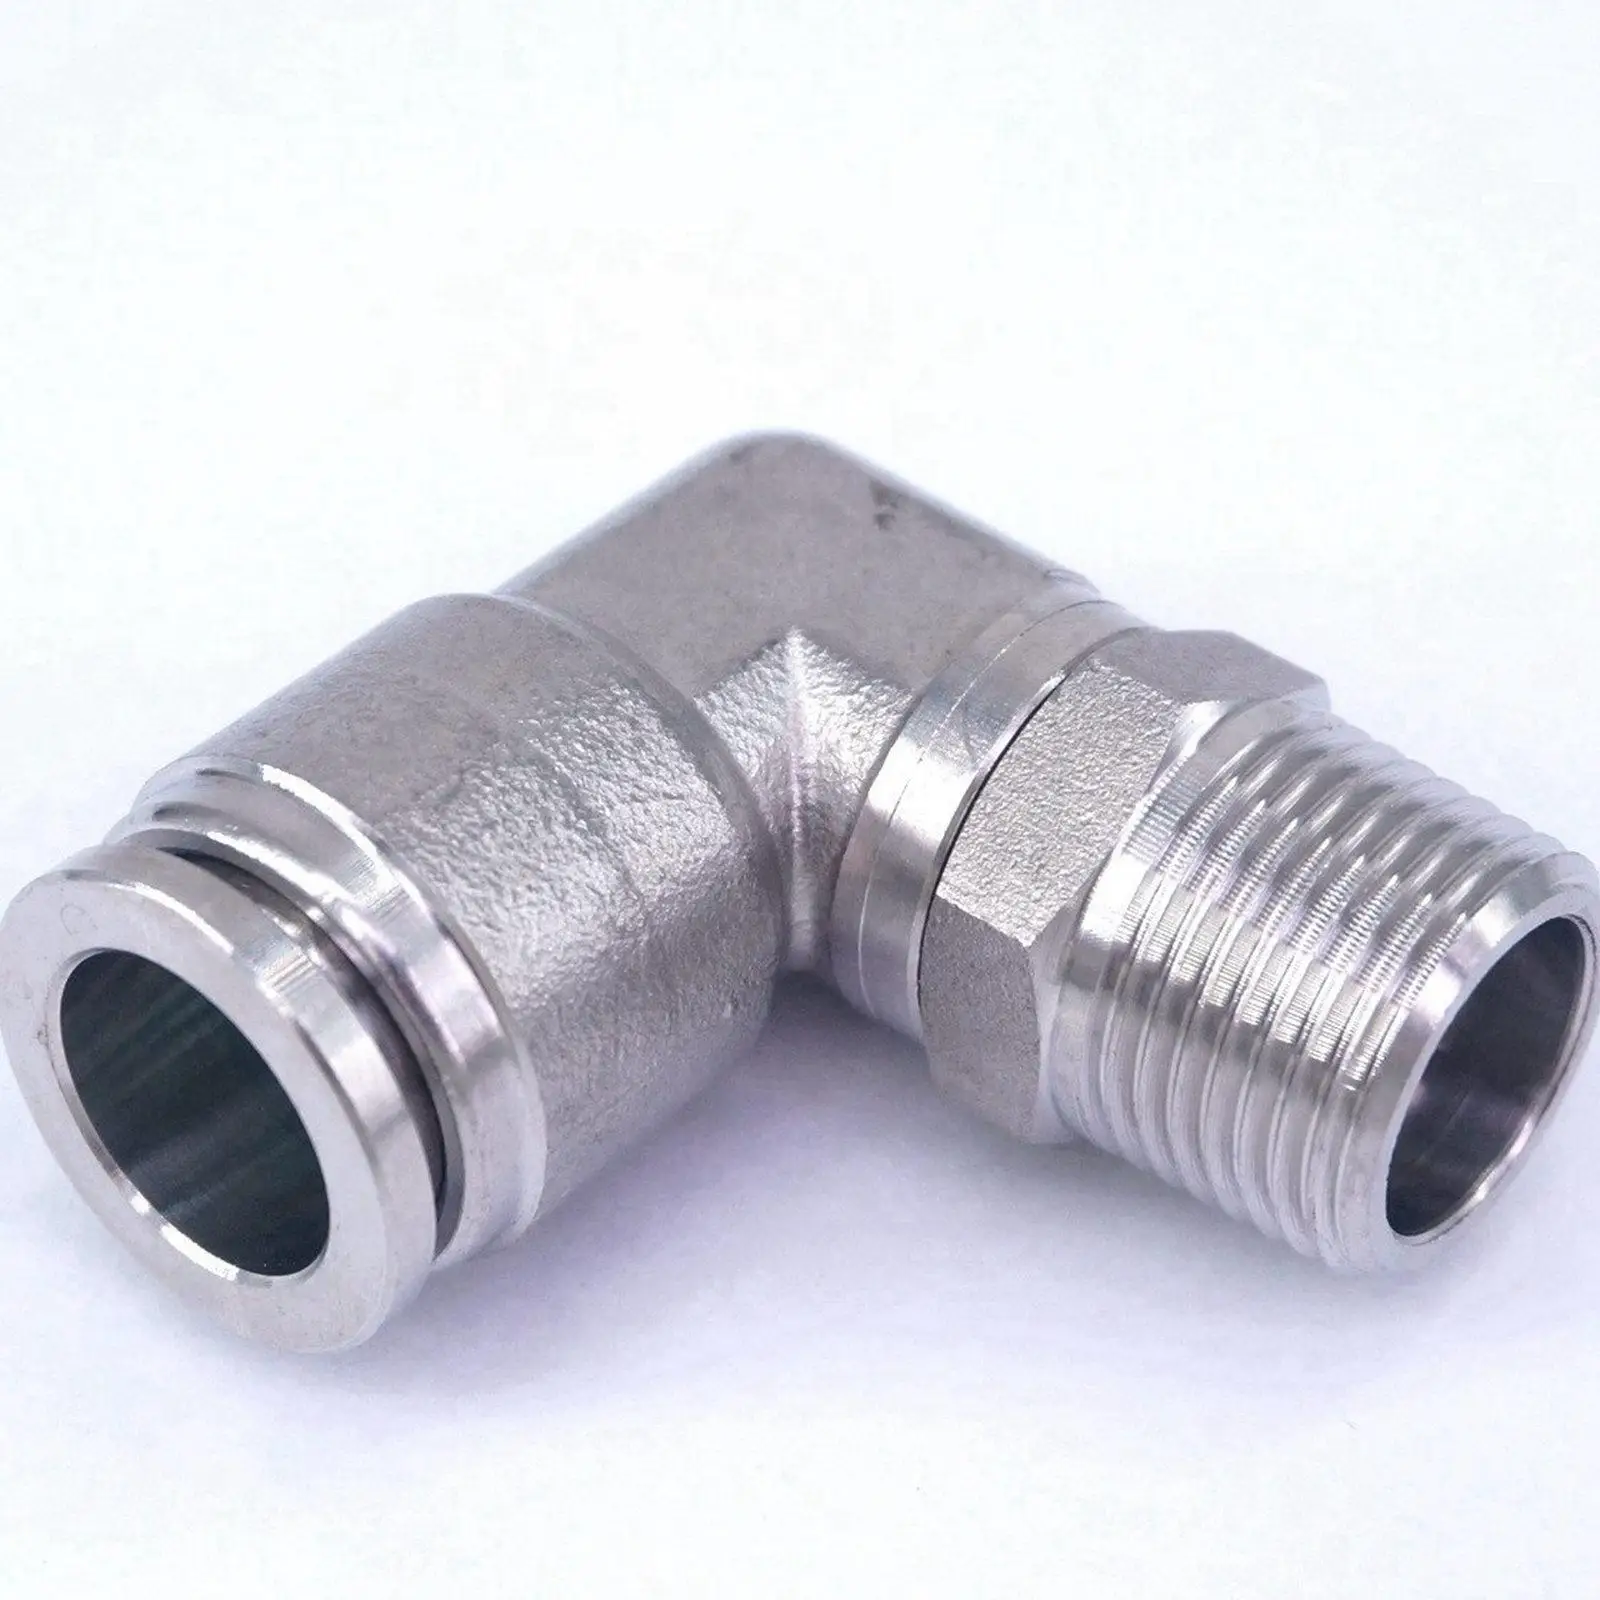 

Fit Tube OD 12mm-3/8" BSP Male Elbow 304 Stainless Steel Pneumatic Connector Quick Connector Fittings